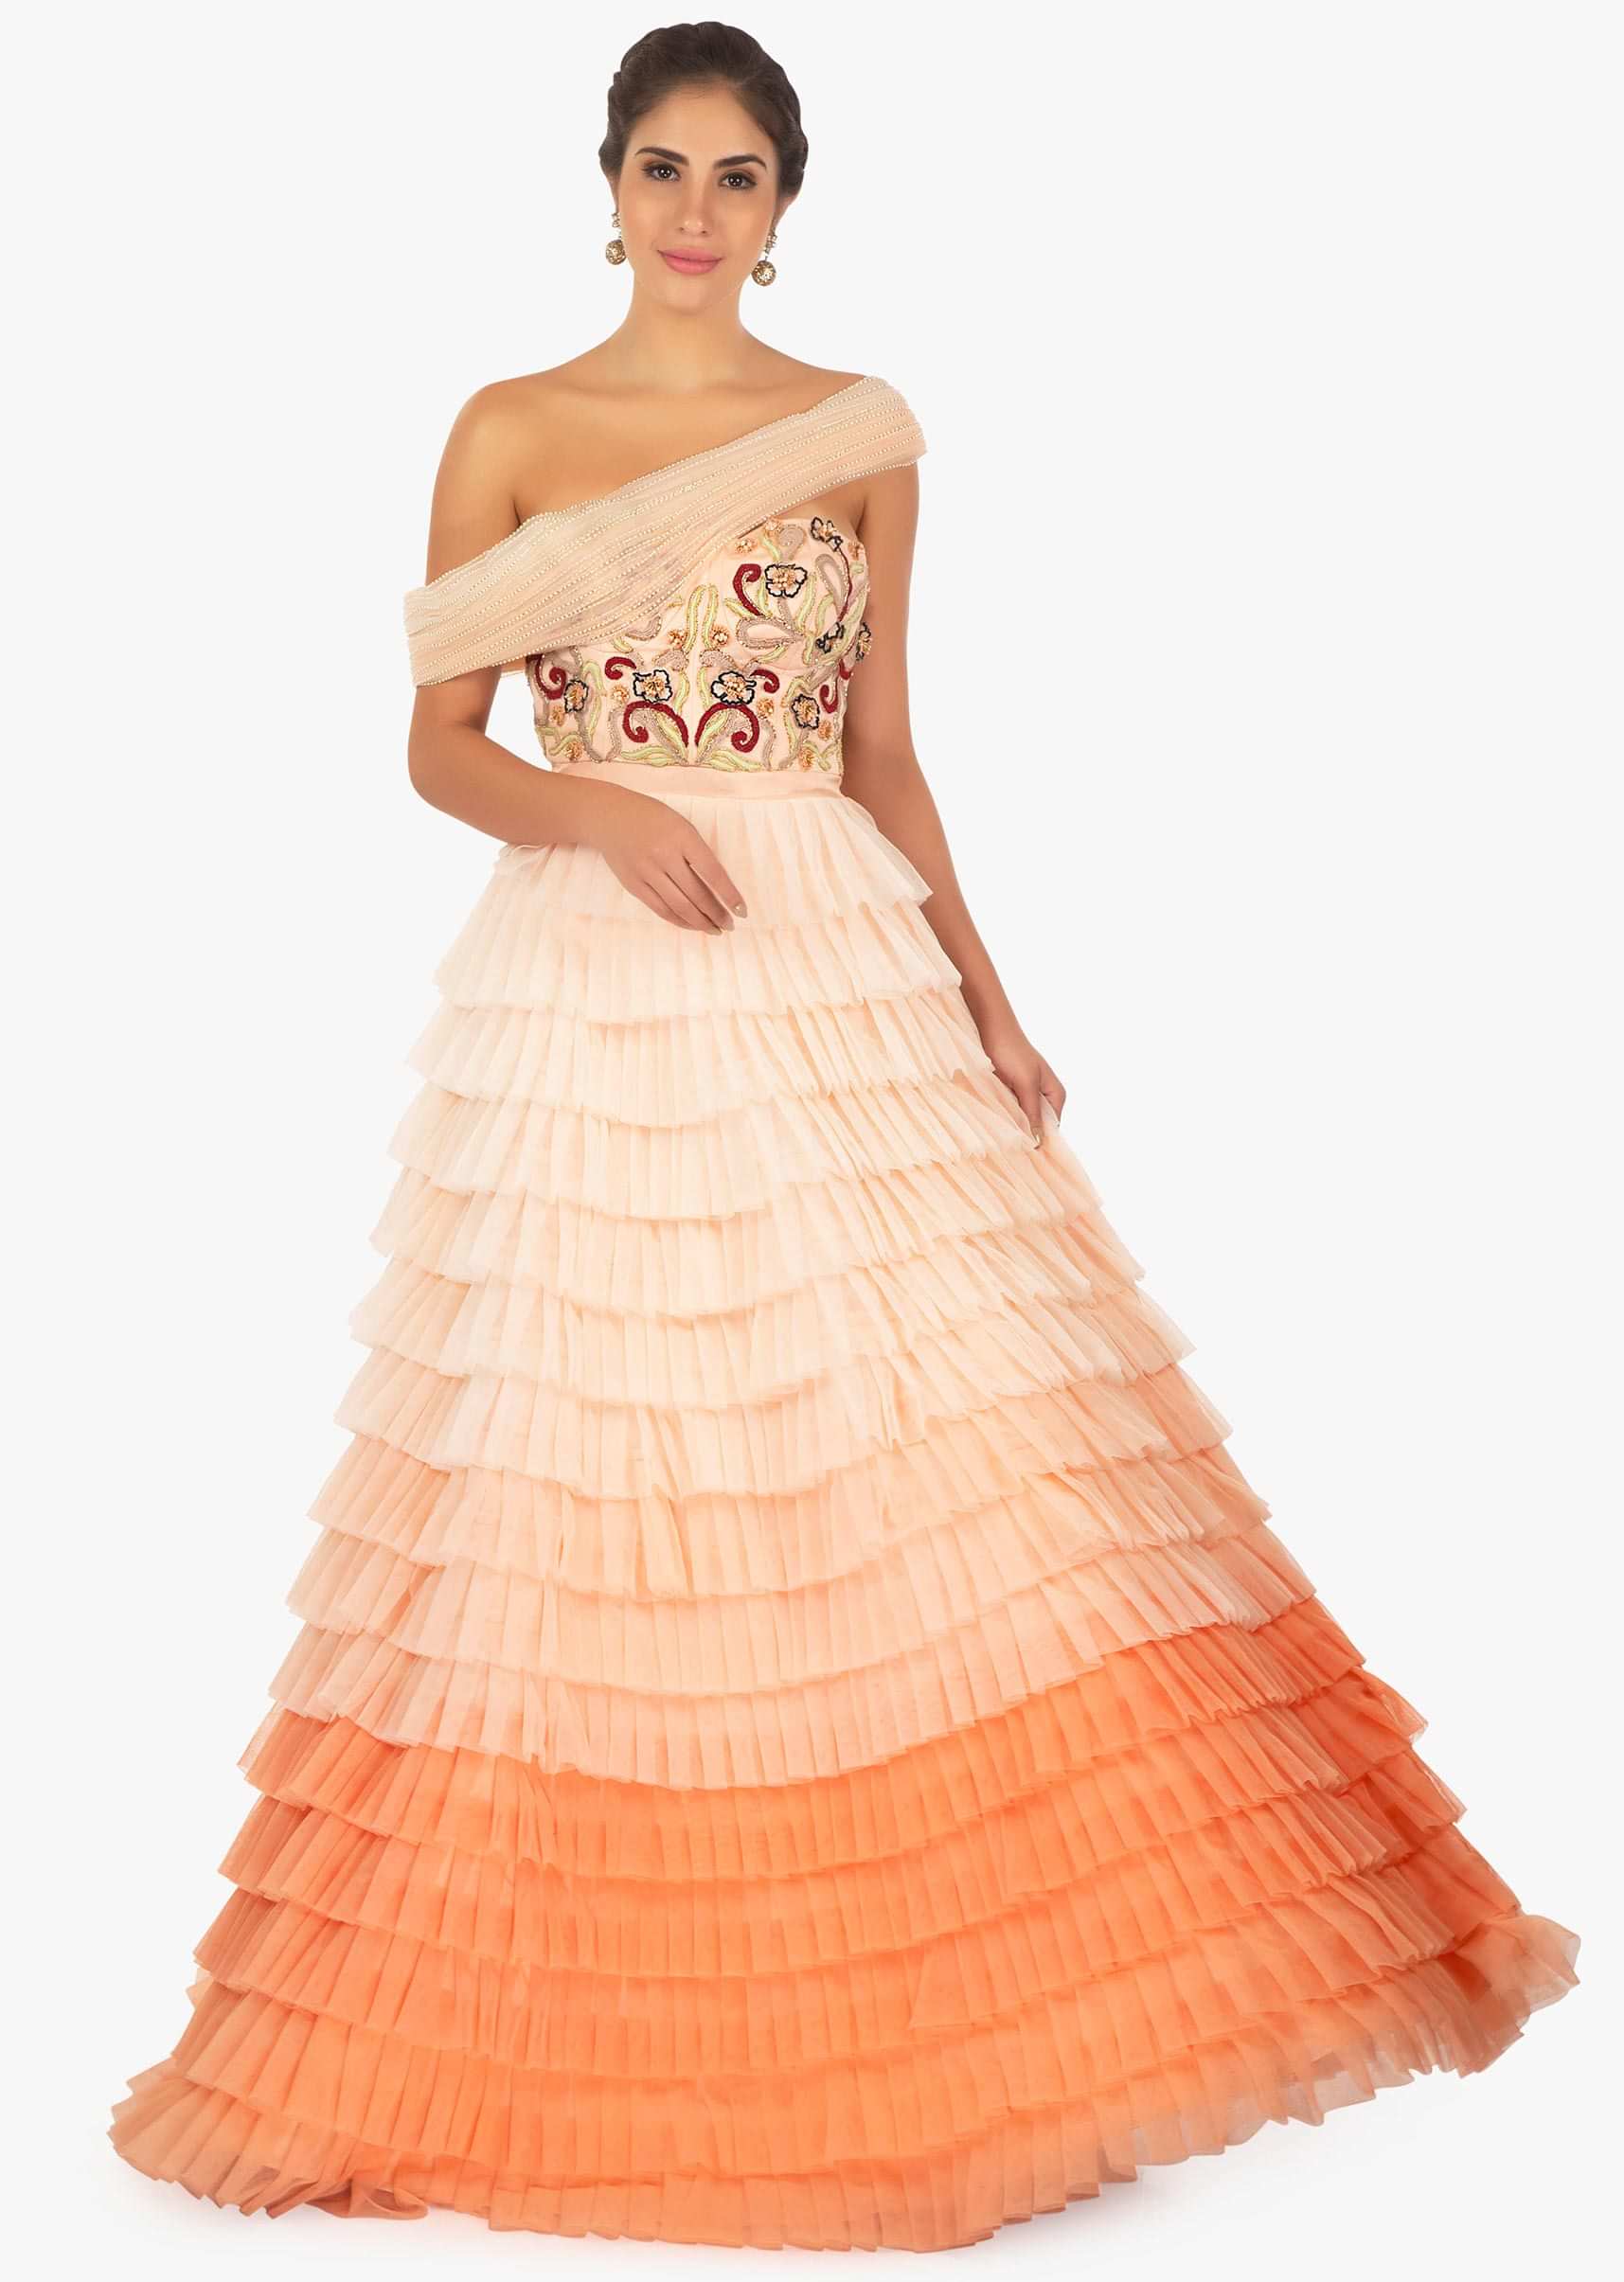 Shaded peach gown featuring in 3 D flowers and resham embroidery  only on Kalki